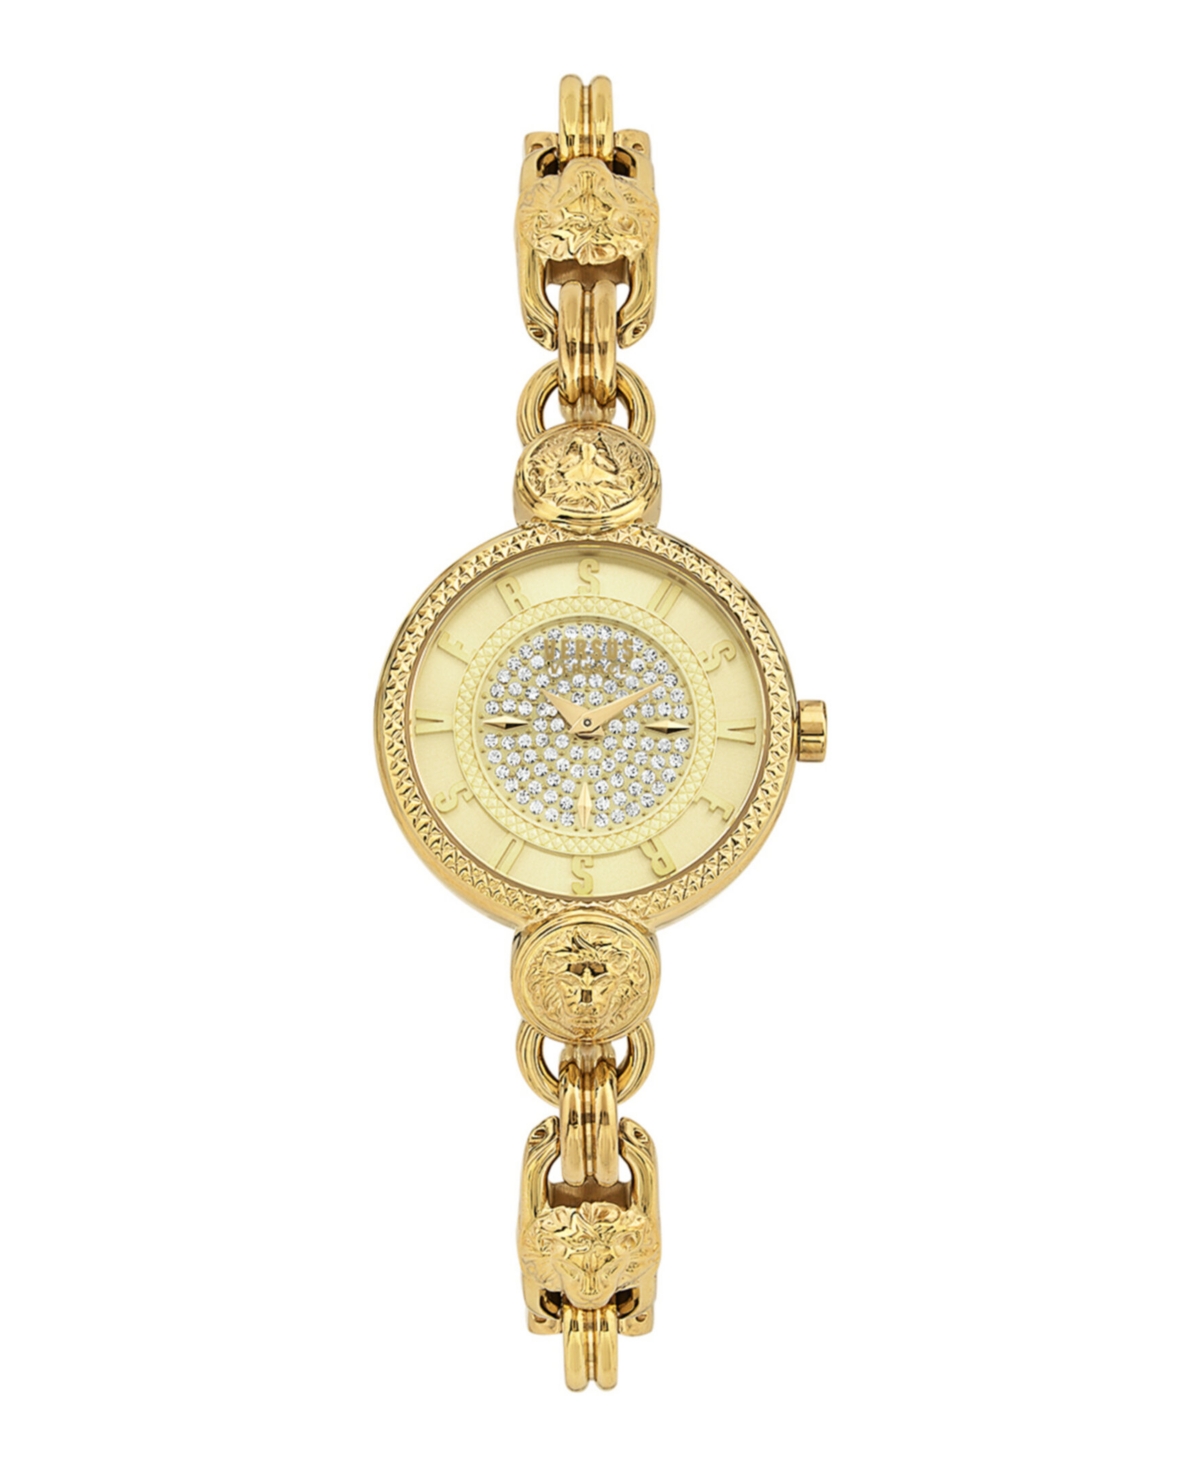 Versus Women's Les Docks Petite 2 Hand Quartz Gold-tone Stainless Steel Watch, 30mm In Ion Plating Yellow Gold